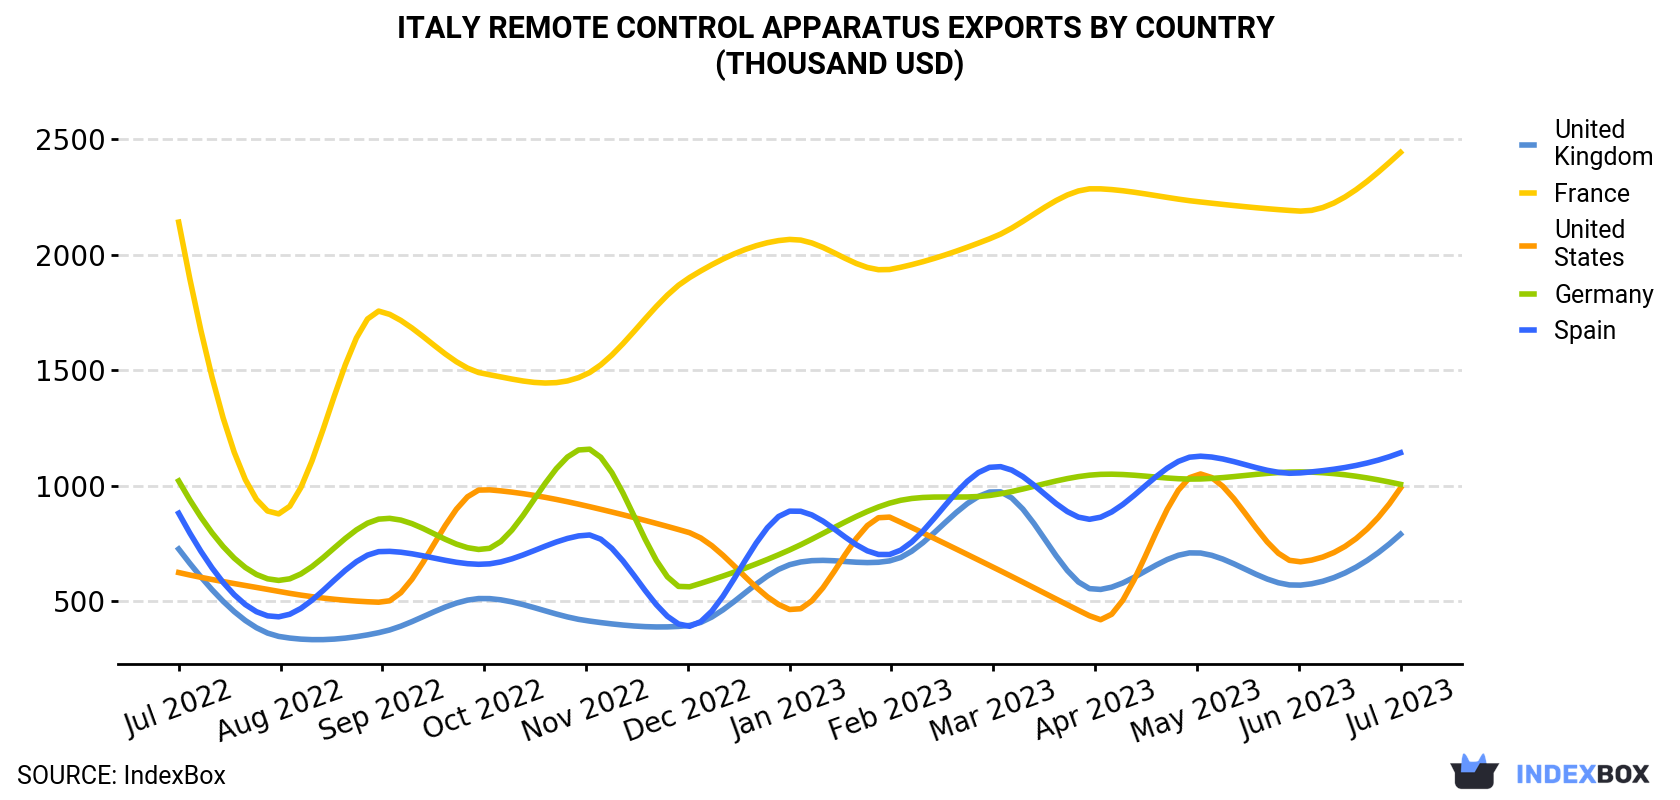 Italy Remote Control Apparatus Exports By Country (Thousand USD)